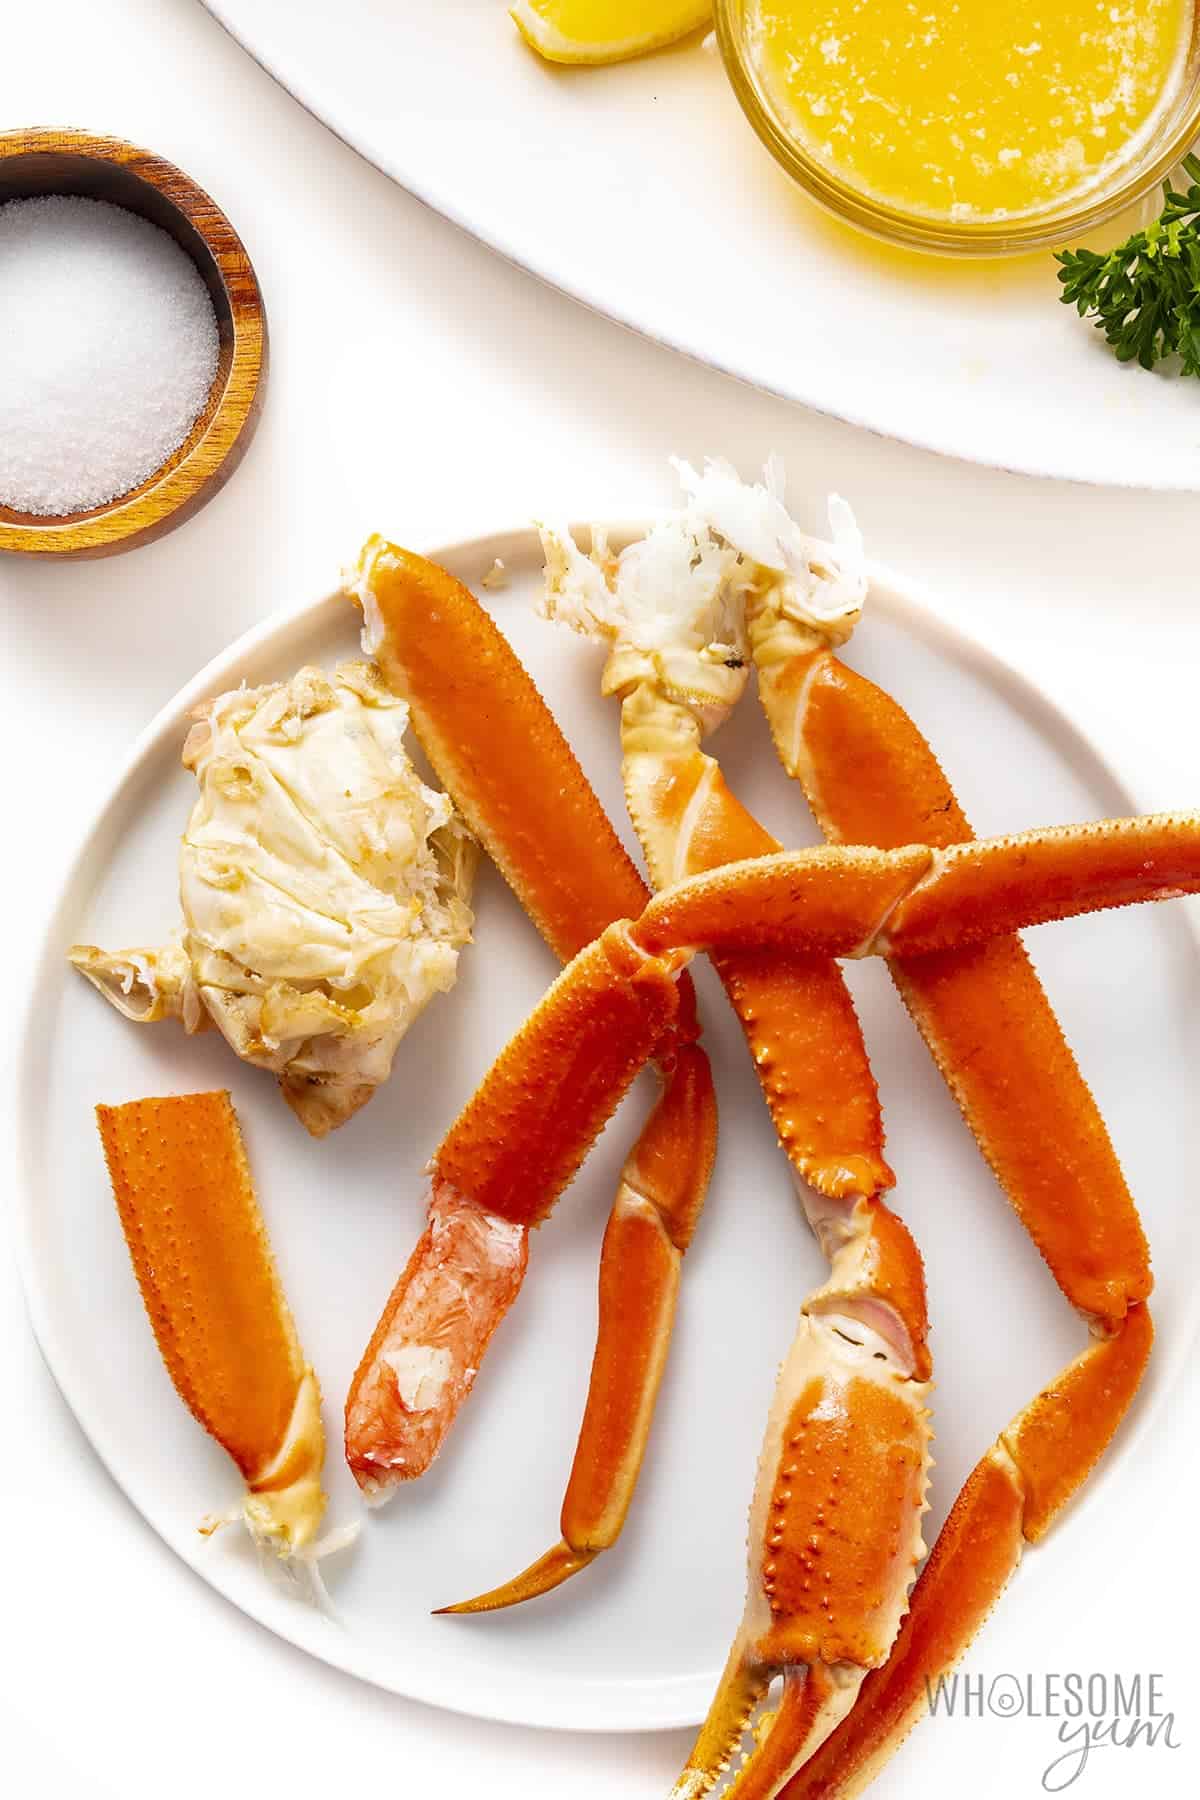 How to eat crab legs- picture showing crab claws broken open